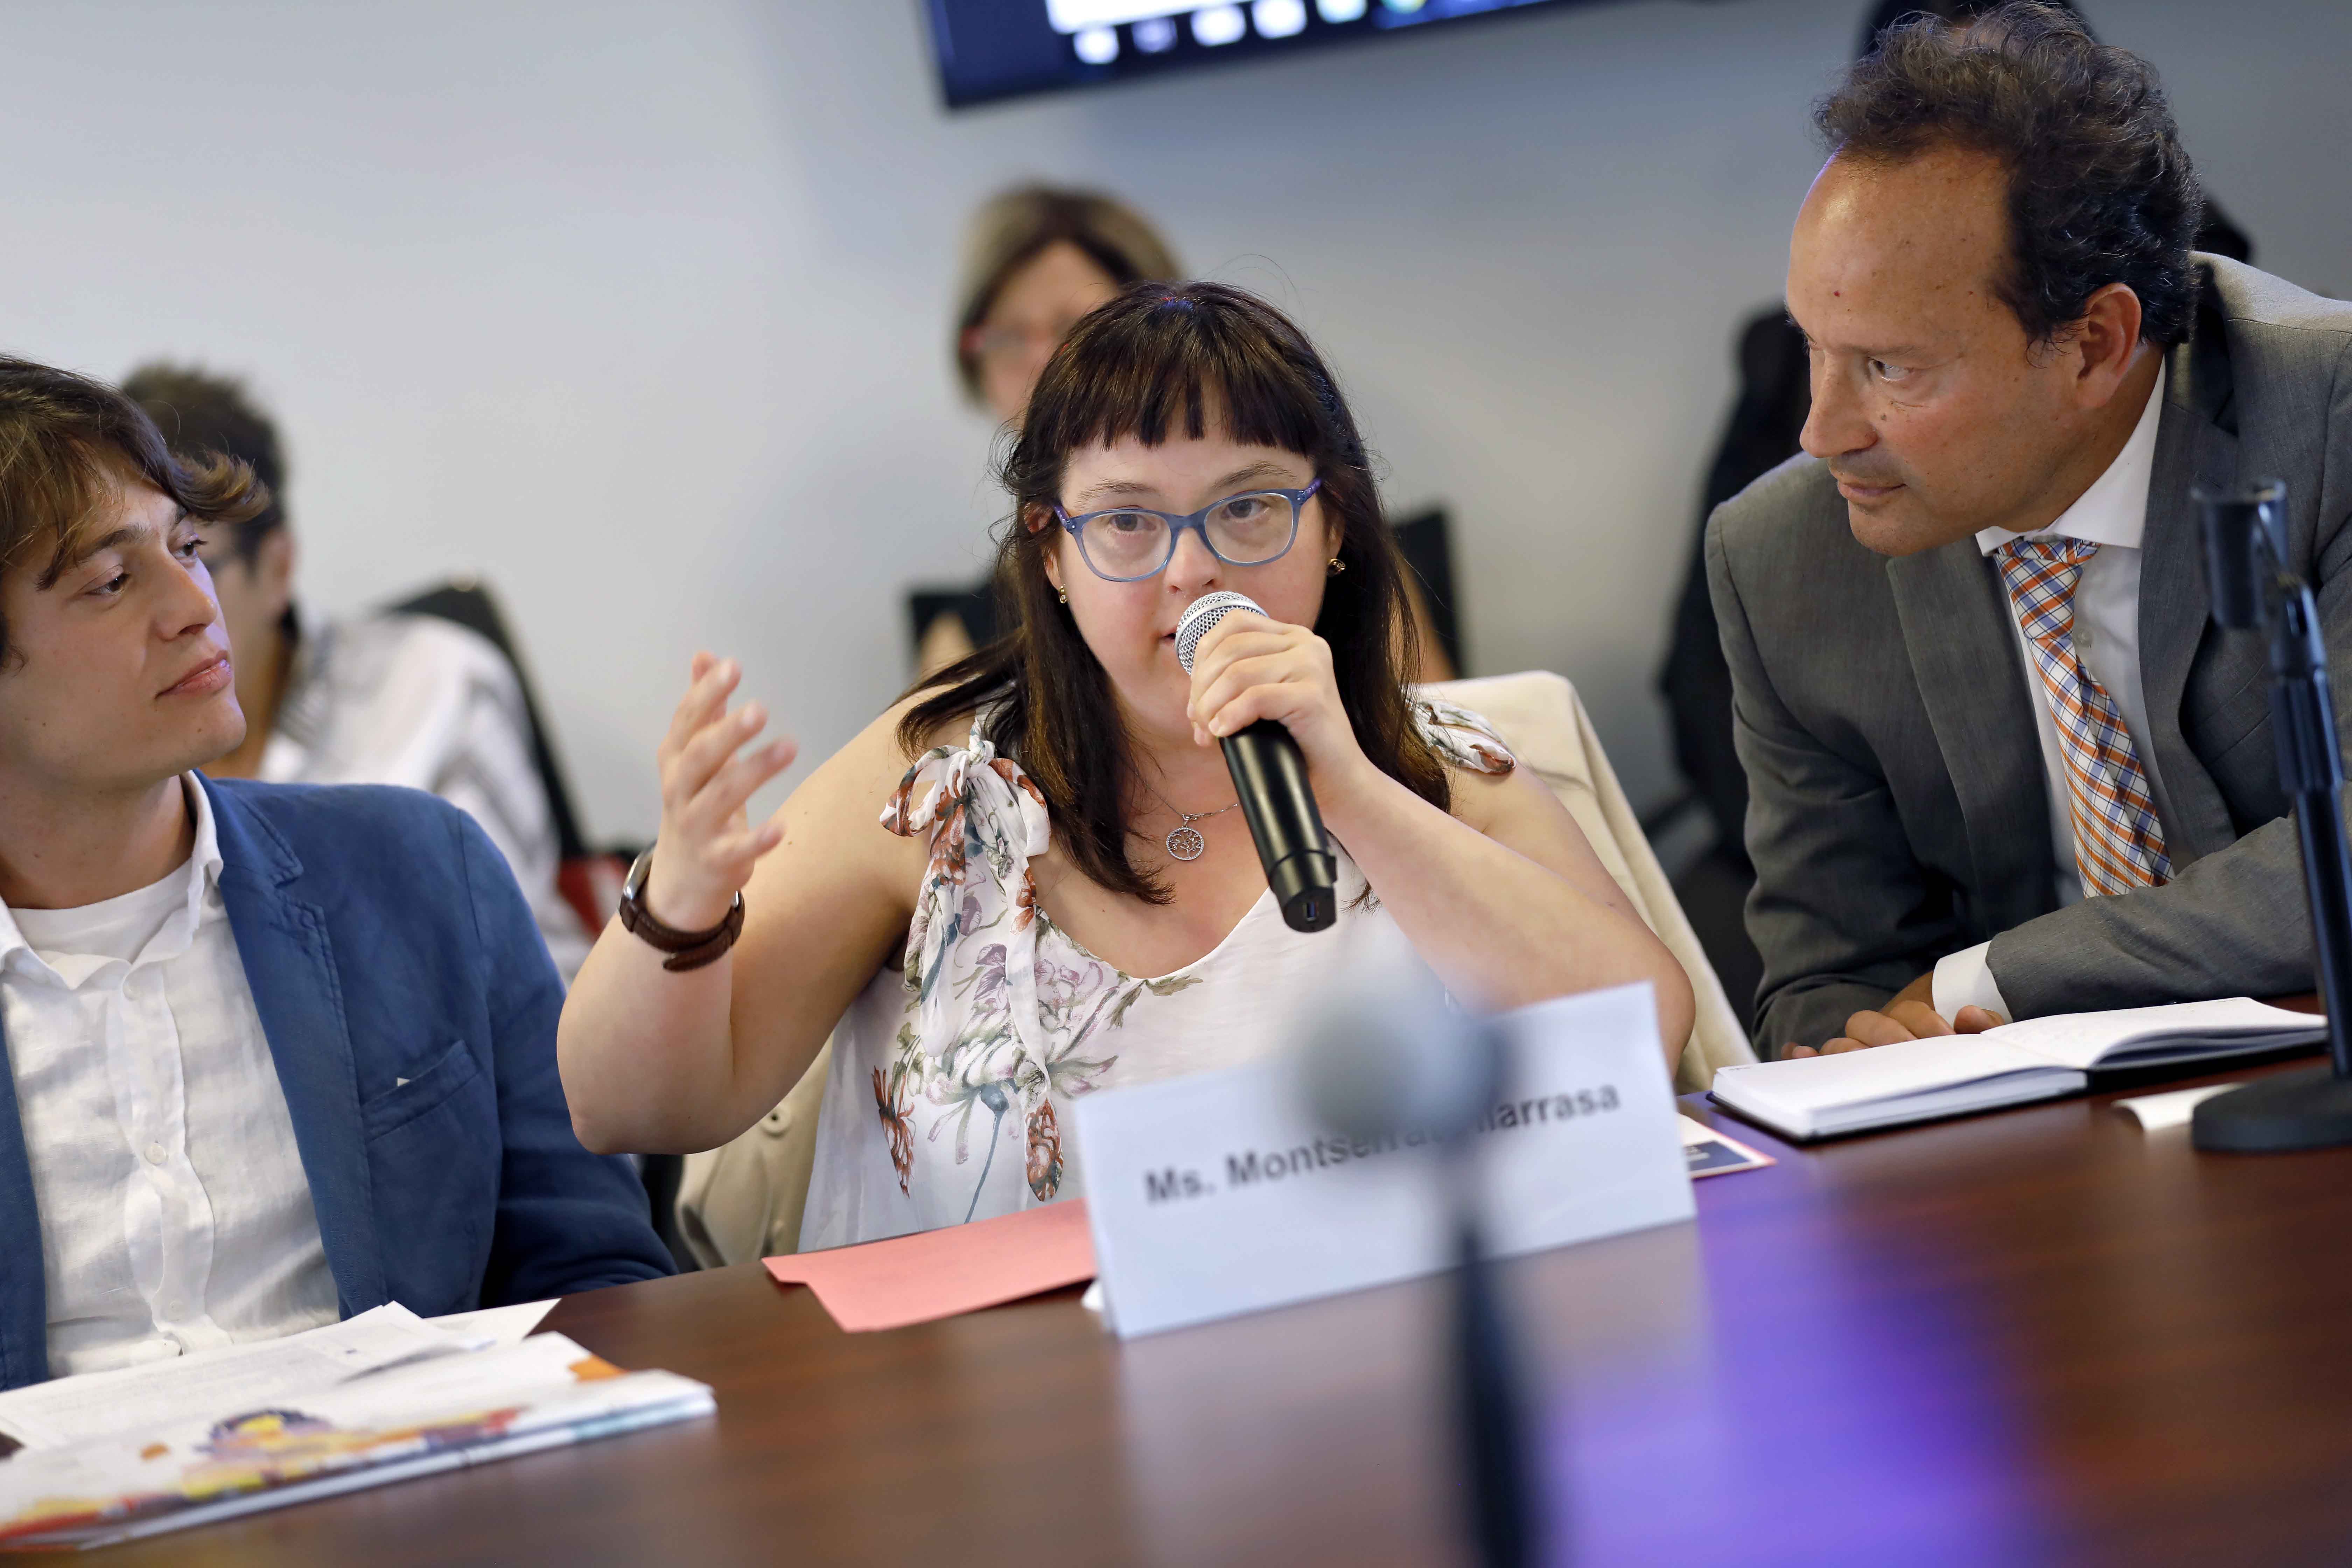 Ms. Montserrat Vilarrasa, Secretary of the Assembly of Human Rights Montserrat Trueta and Member for Intellectual Disability at the City Council of Barcelona, speaking during a High-Level Meeting of Women with Disabilities in Political and Public Leadership (UN Women Headquarters, New York, June 2019). Photo/UN Women